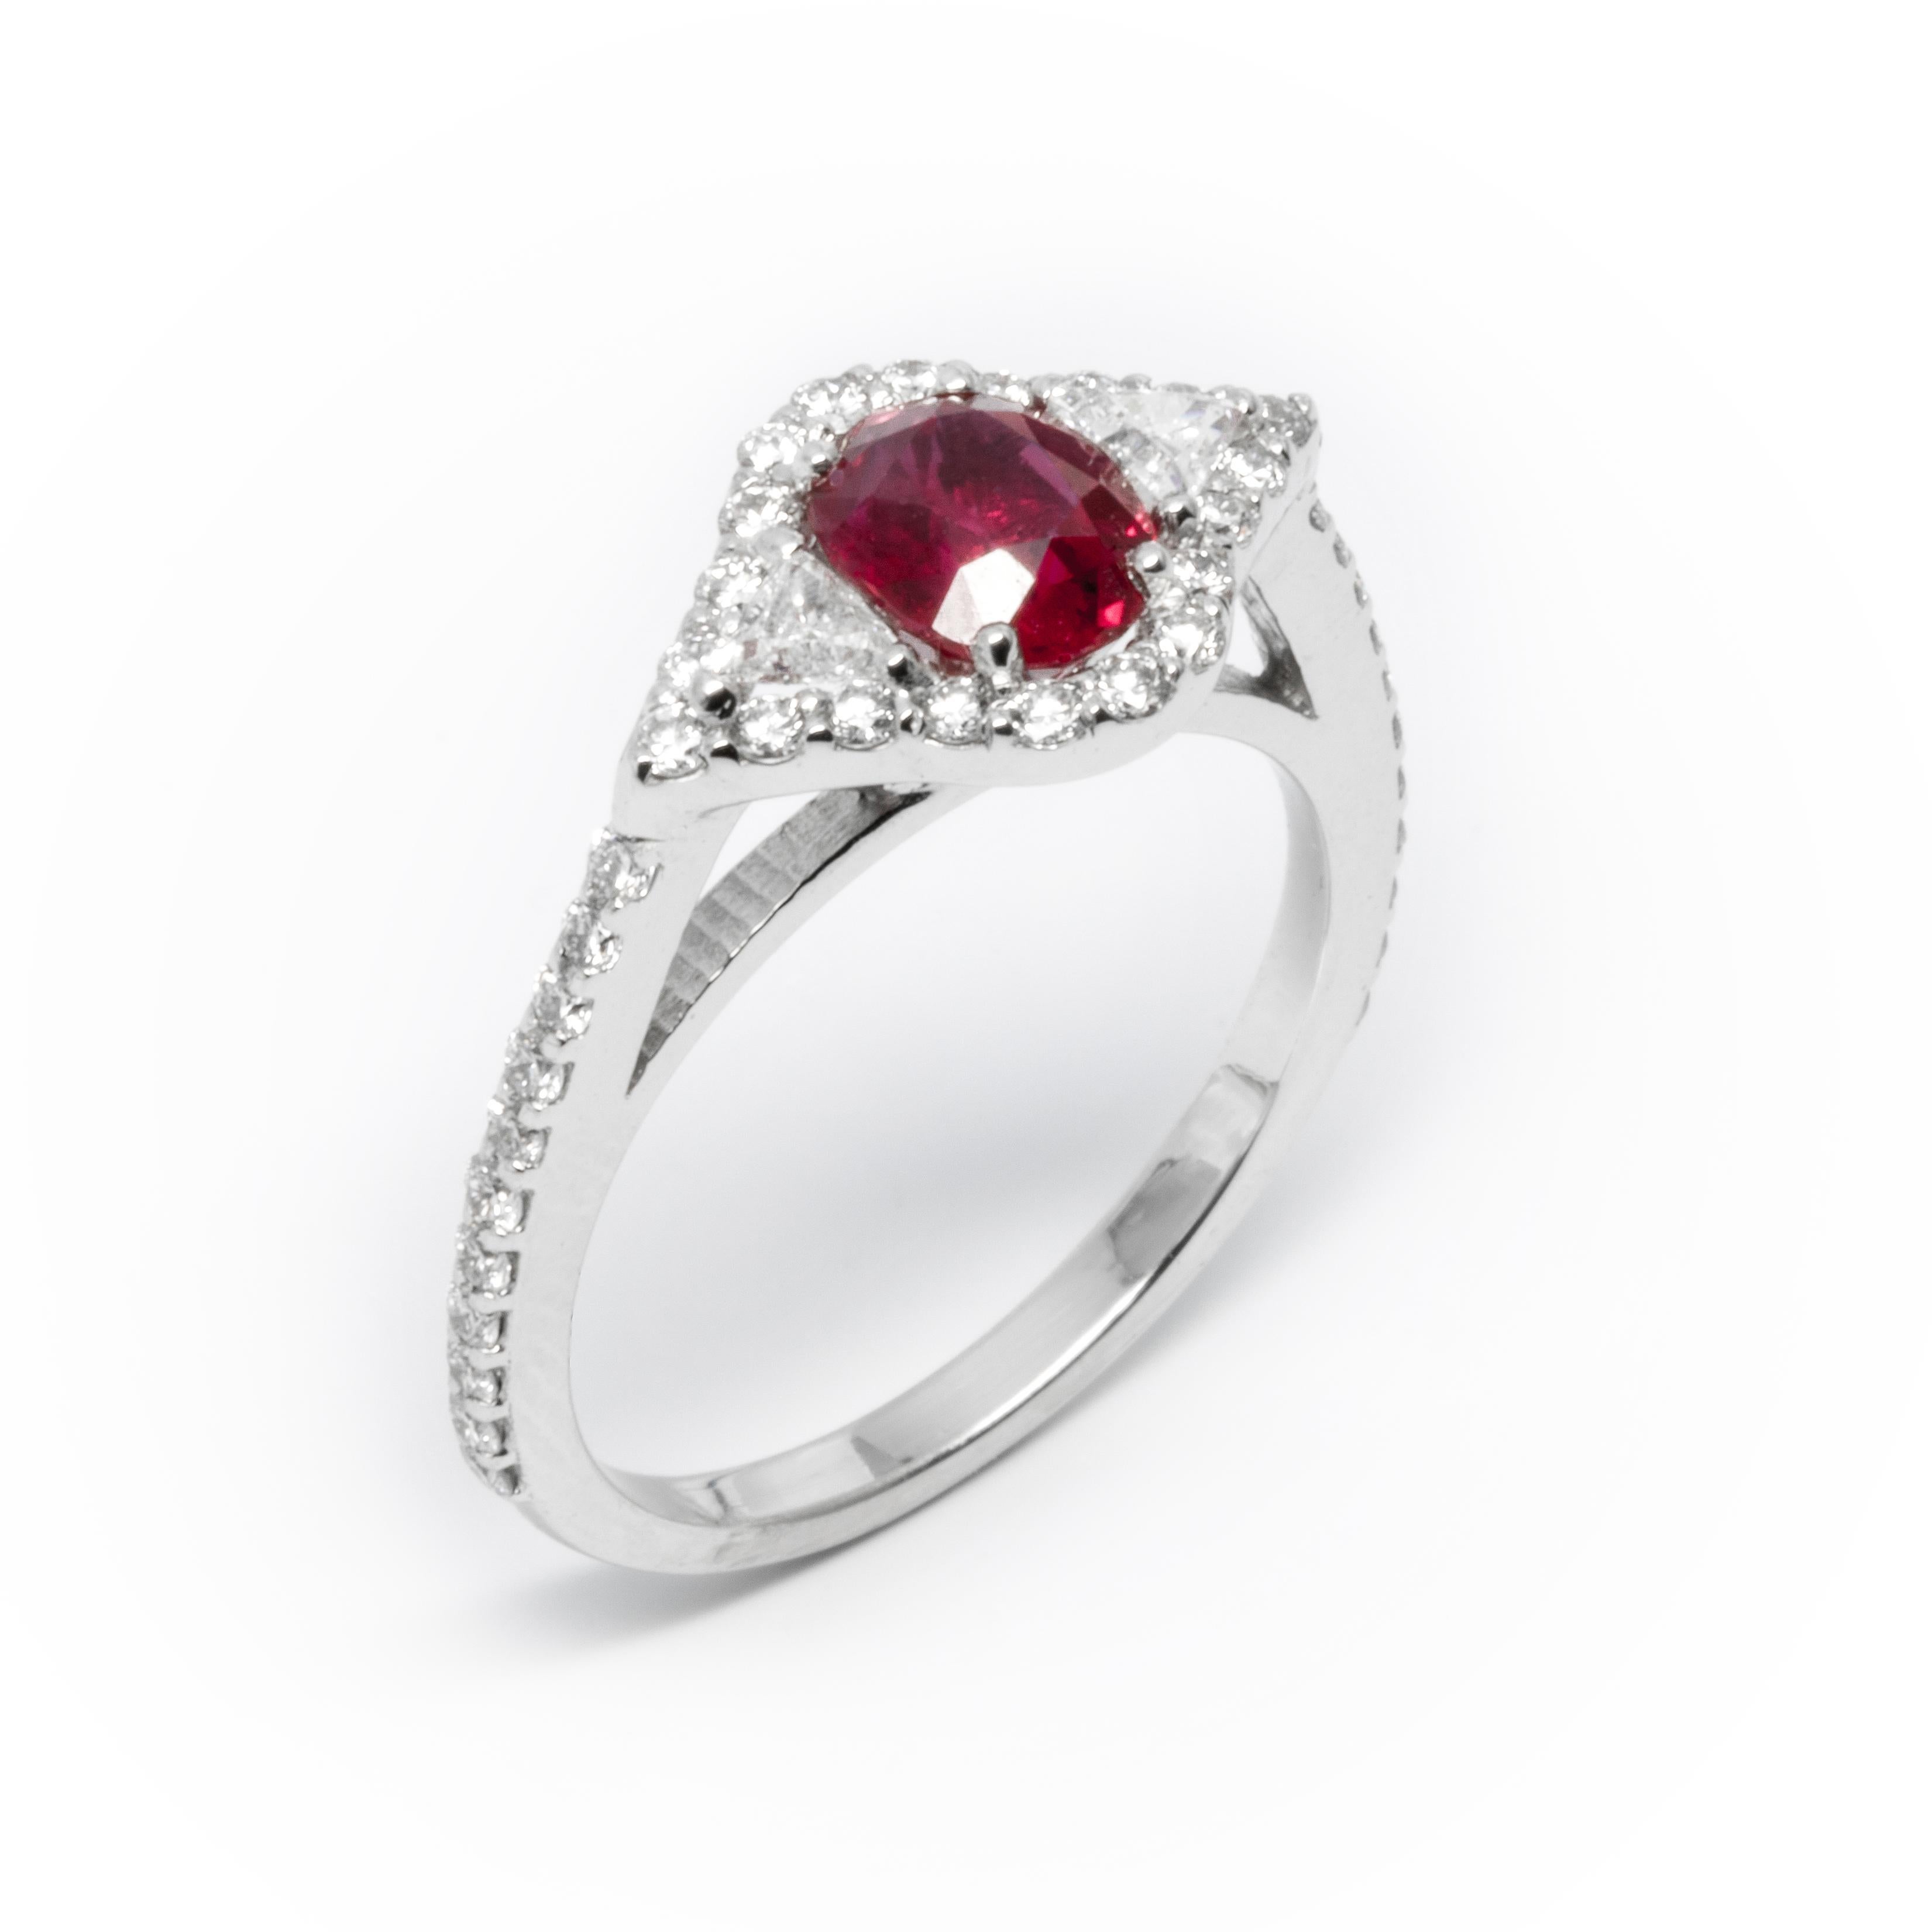 Contemporary Burma Ruby and Diamond White Gold Ring Weighing 2.07 Carat